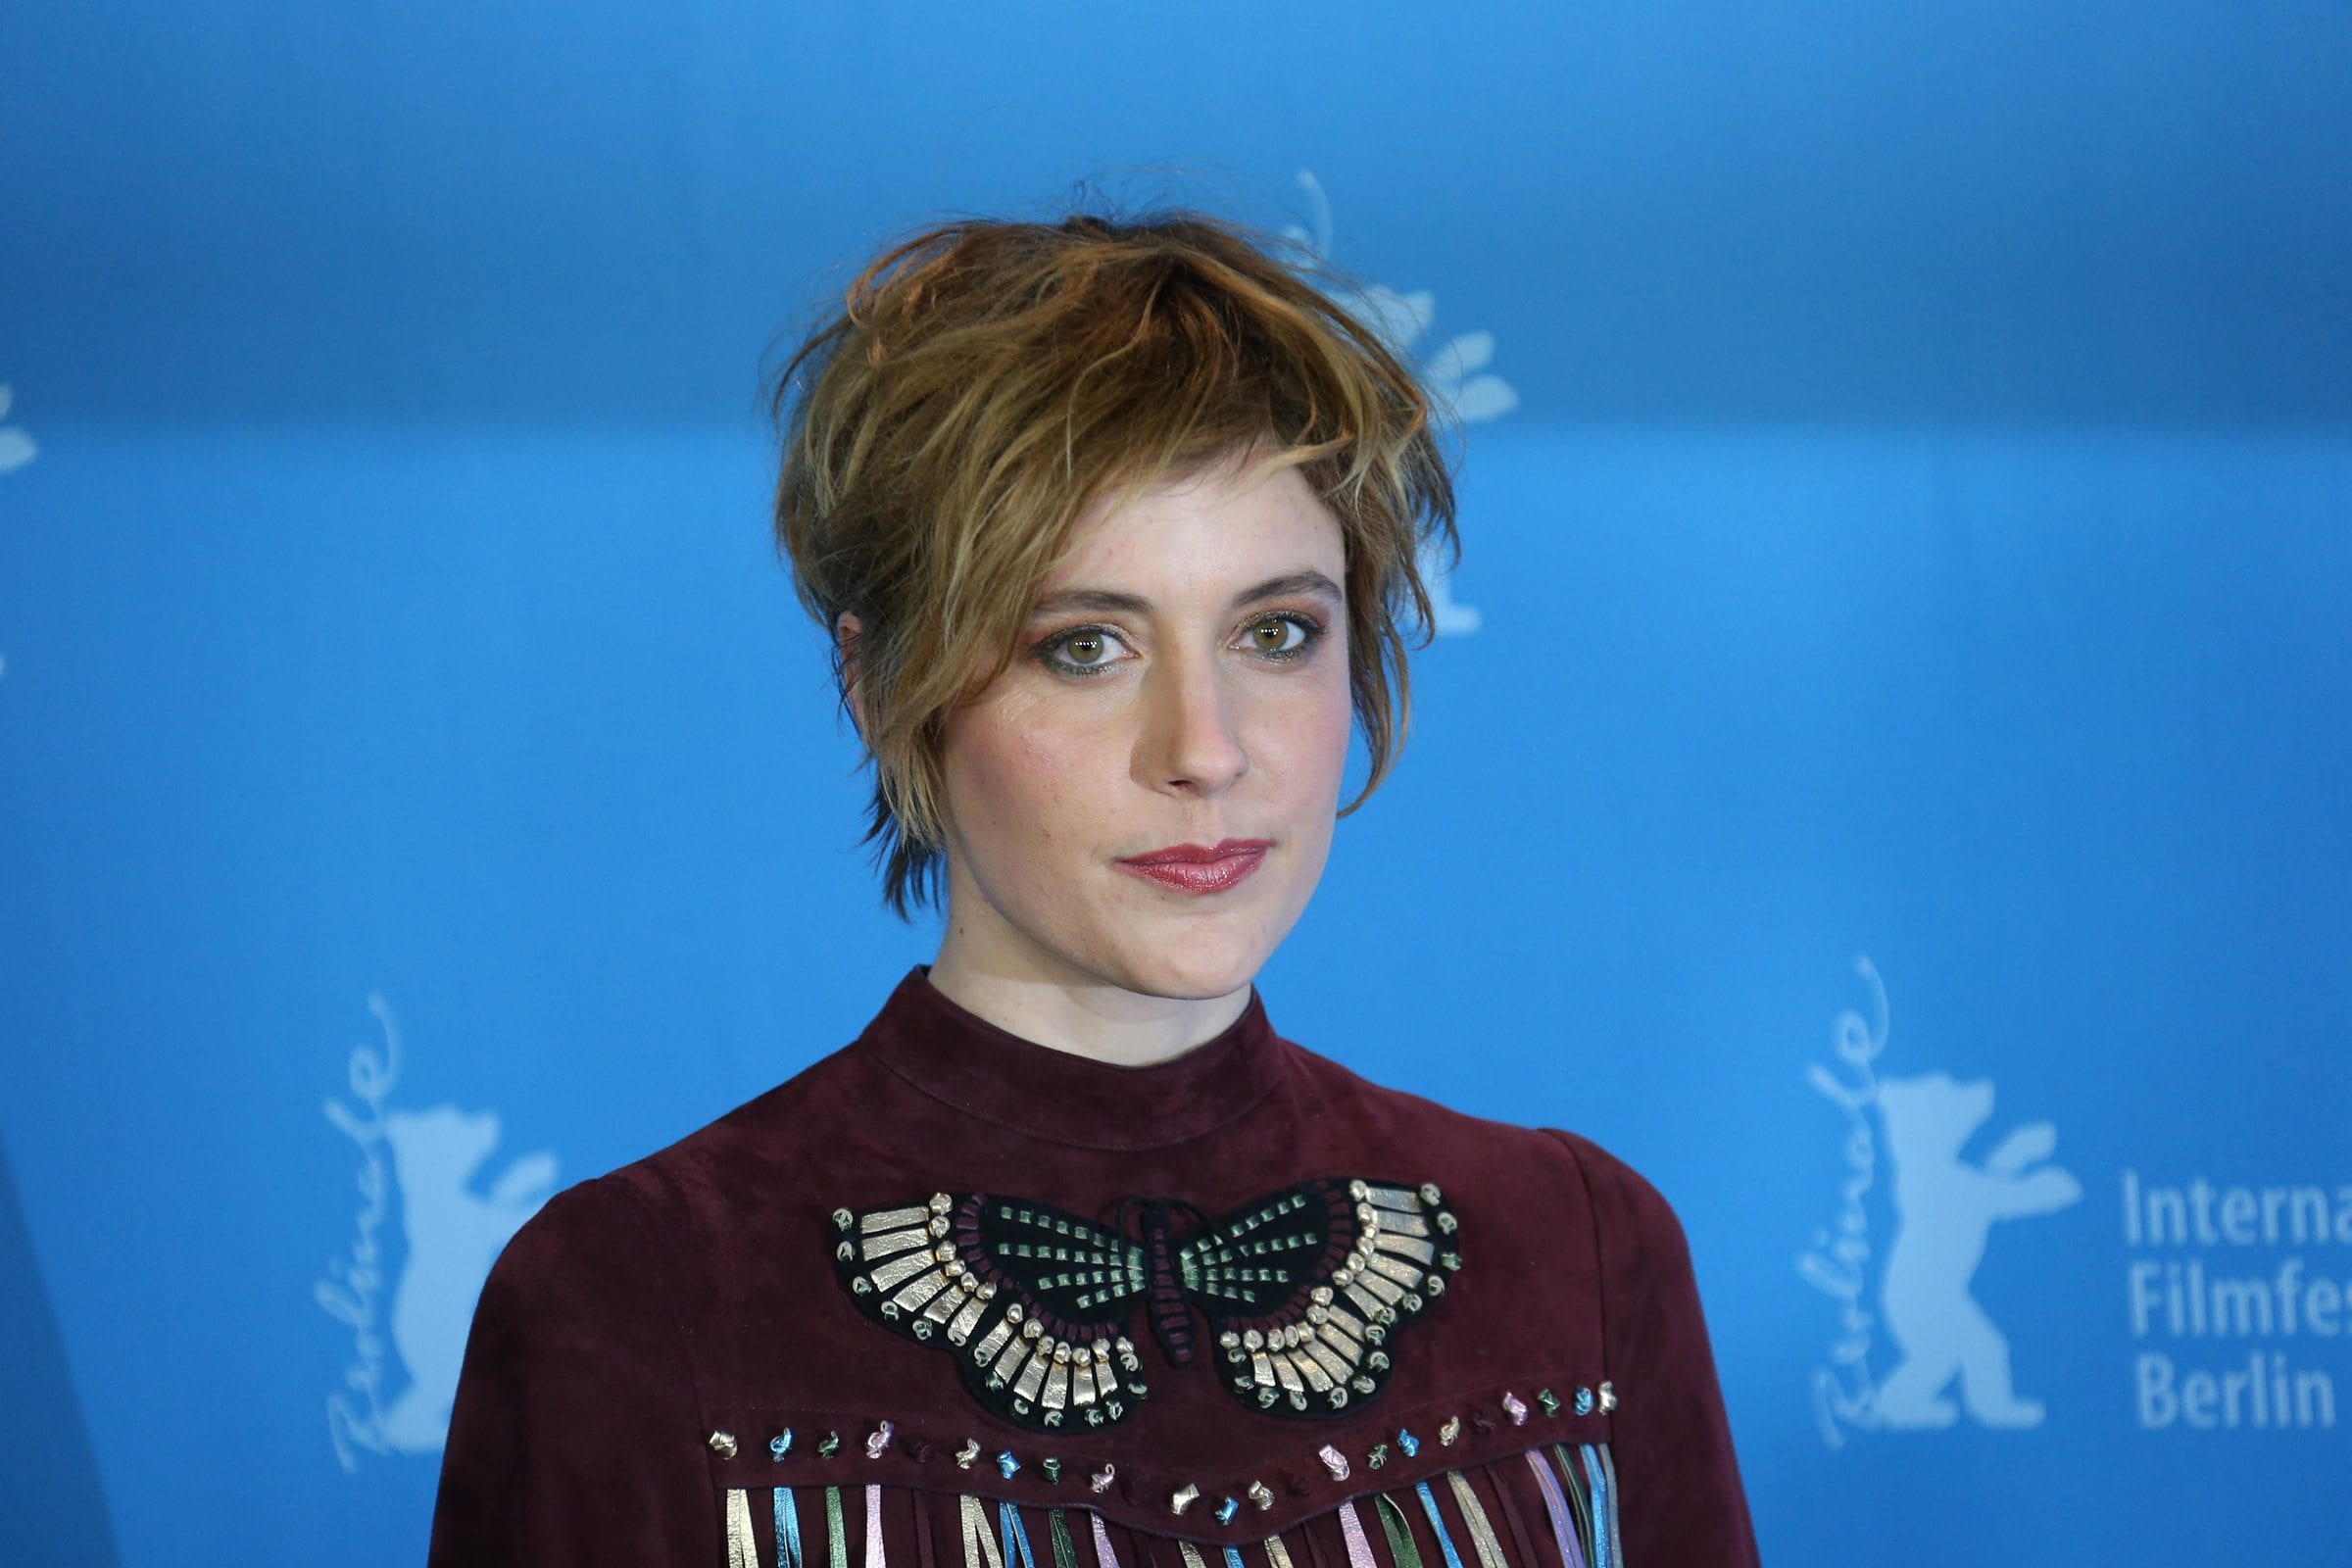 Greta Gerwig becomes a fledgling solo director with her new film 'Lady Bird', starring Oscar-nominated Saoirse Ronan in the lead.